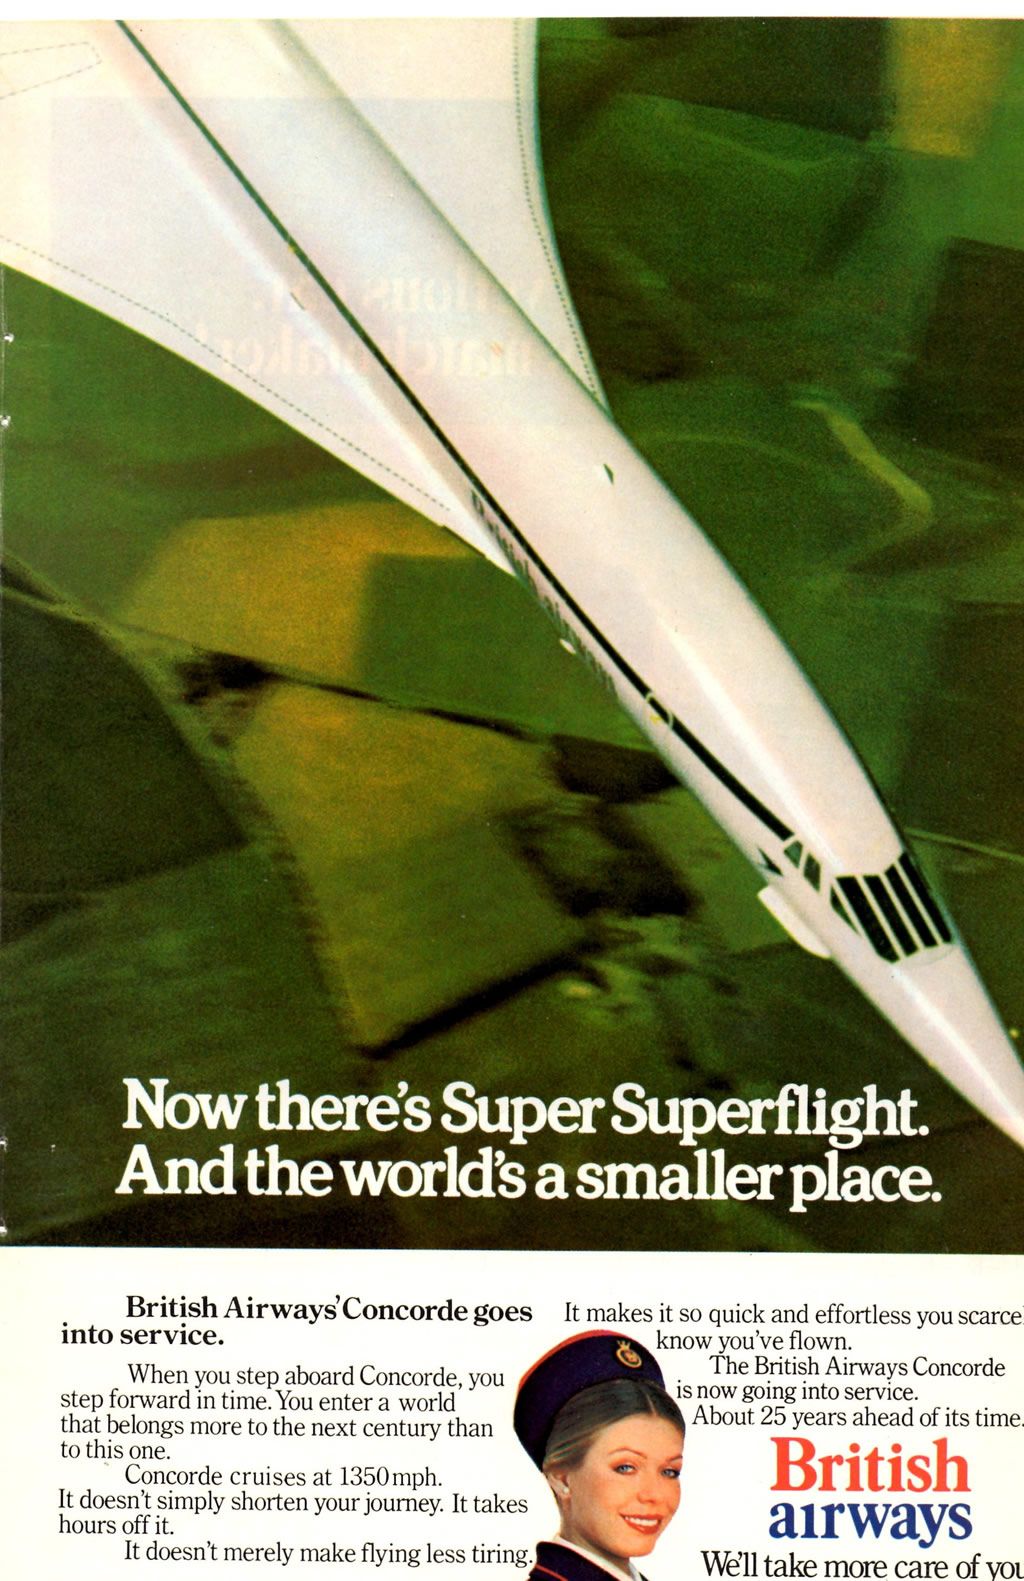 advertisment on concorde